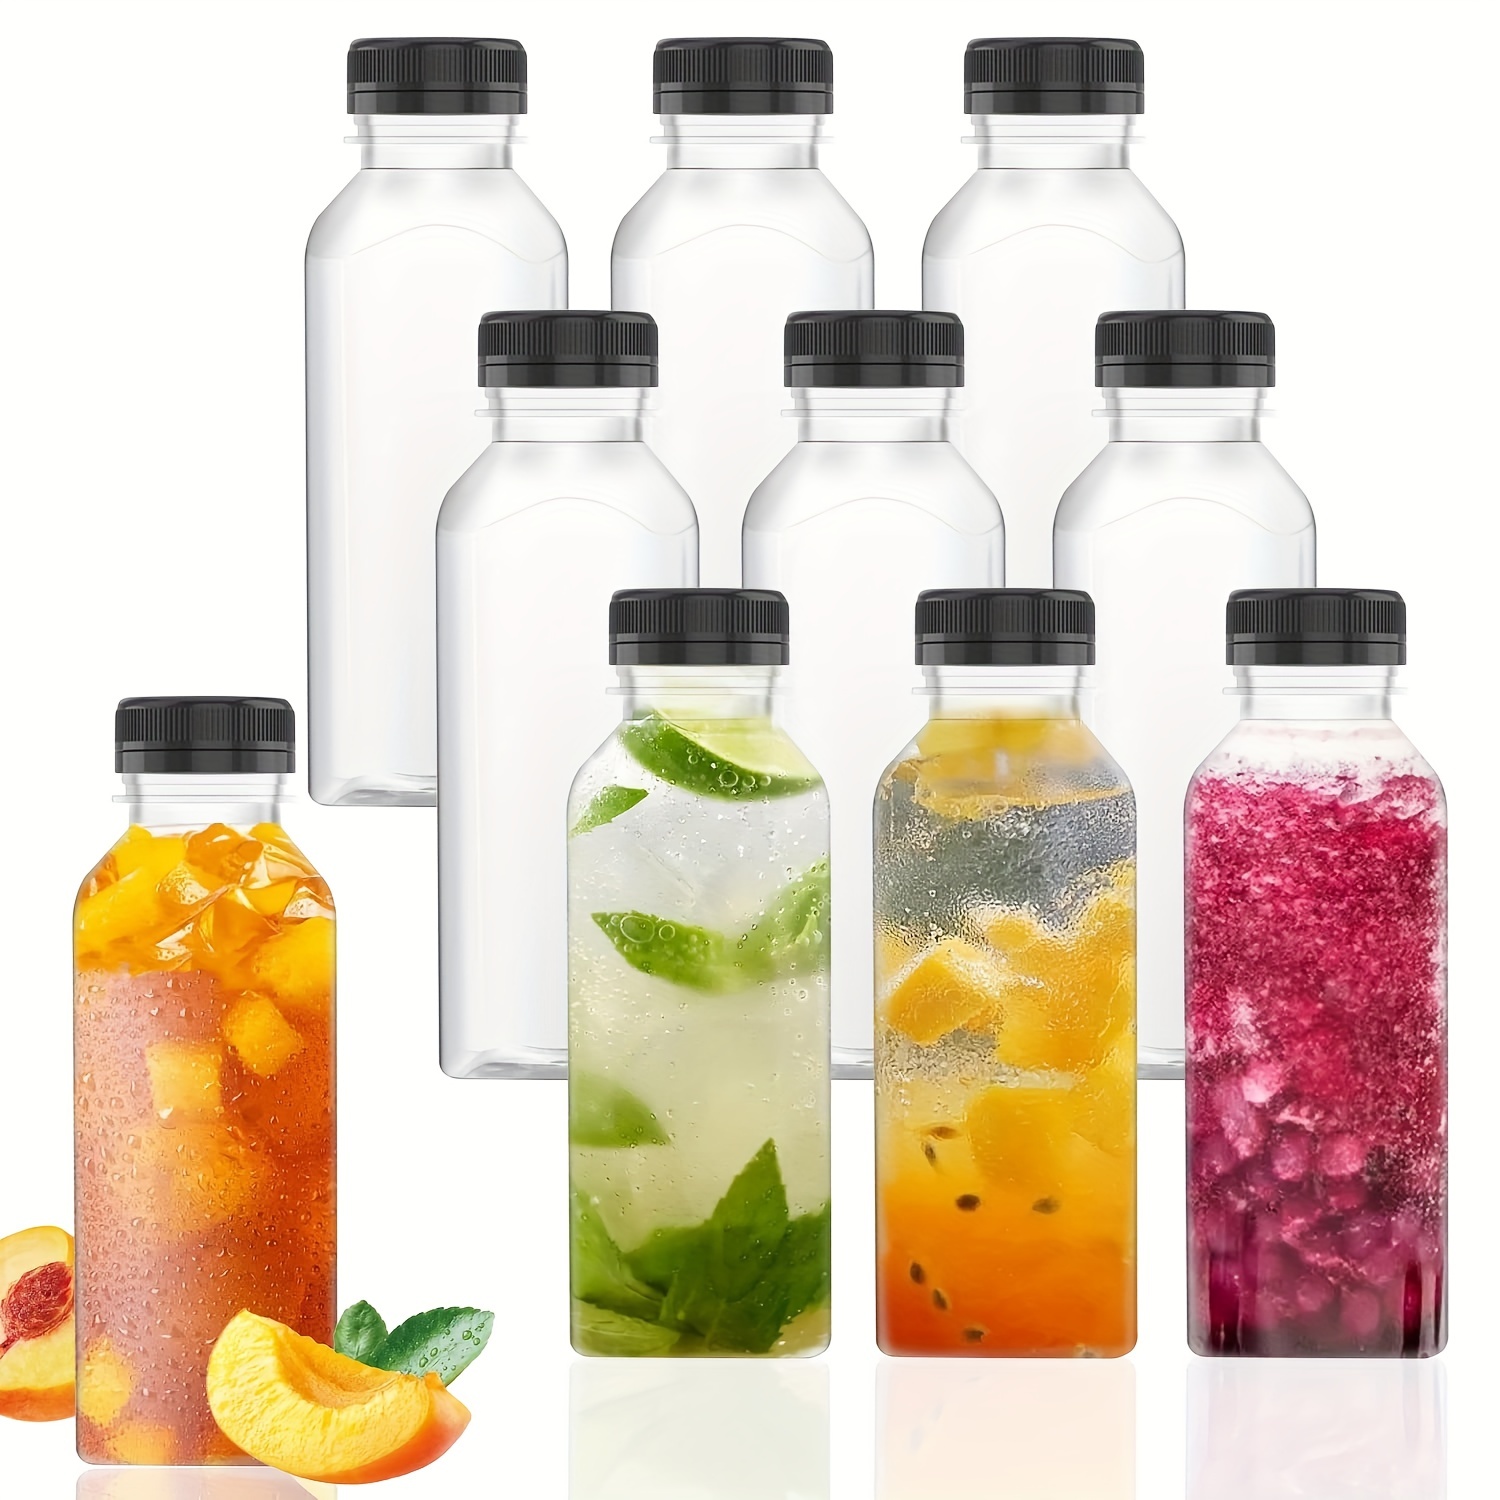 10 Pack) 12oz Empty Clear PET Plastic Juice Bottles with Black Caps -  Reusable Clear Bulk Beverage Containers with Tamper Evident Lids - Green  Juice, Smoothie, Milk, Meal Prep Juice Containers 